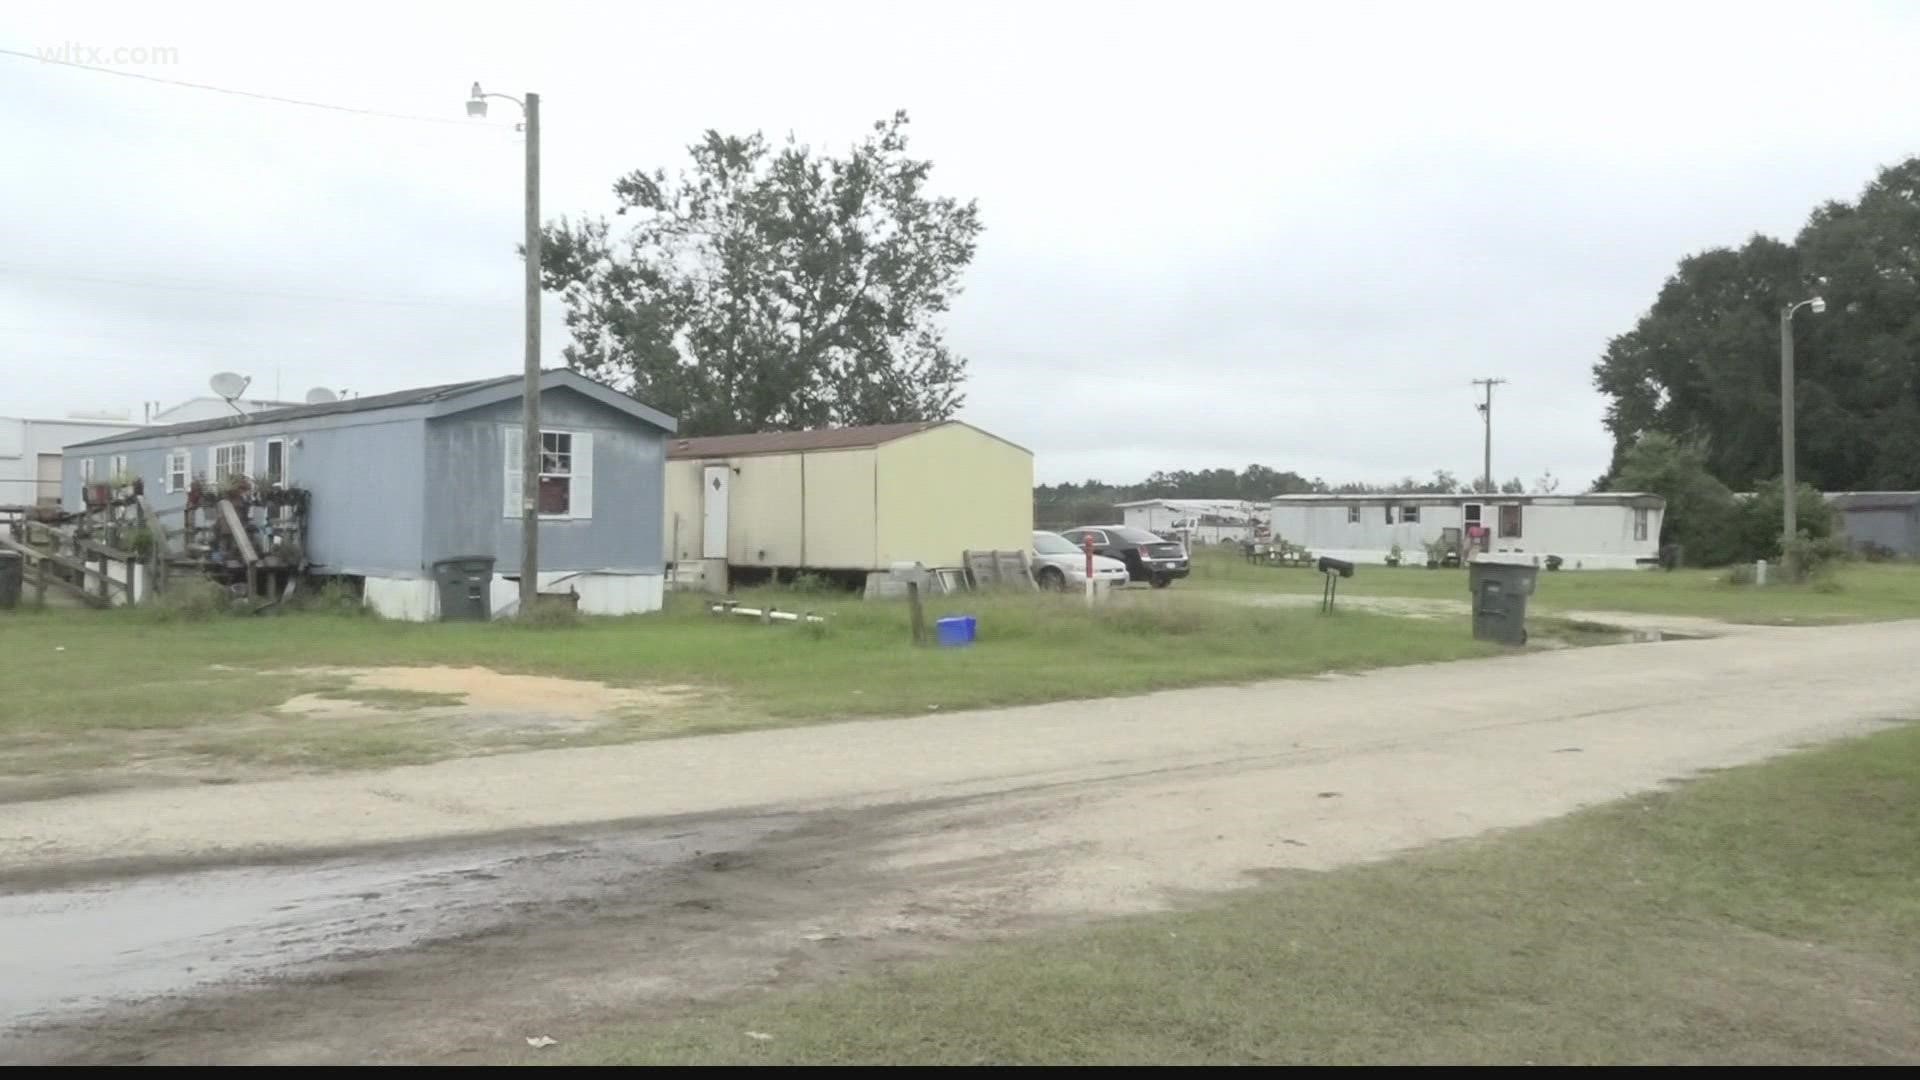 Crepe Myrtle Village, a mobile home park, has been sold and now residents are having to find a new place to live.